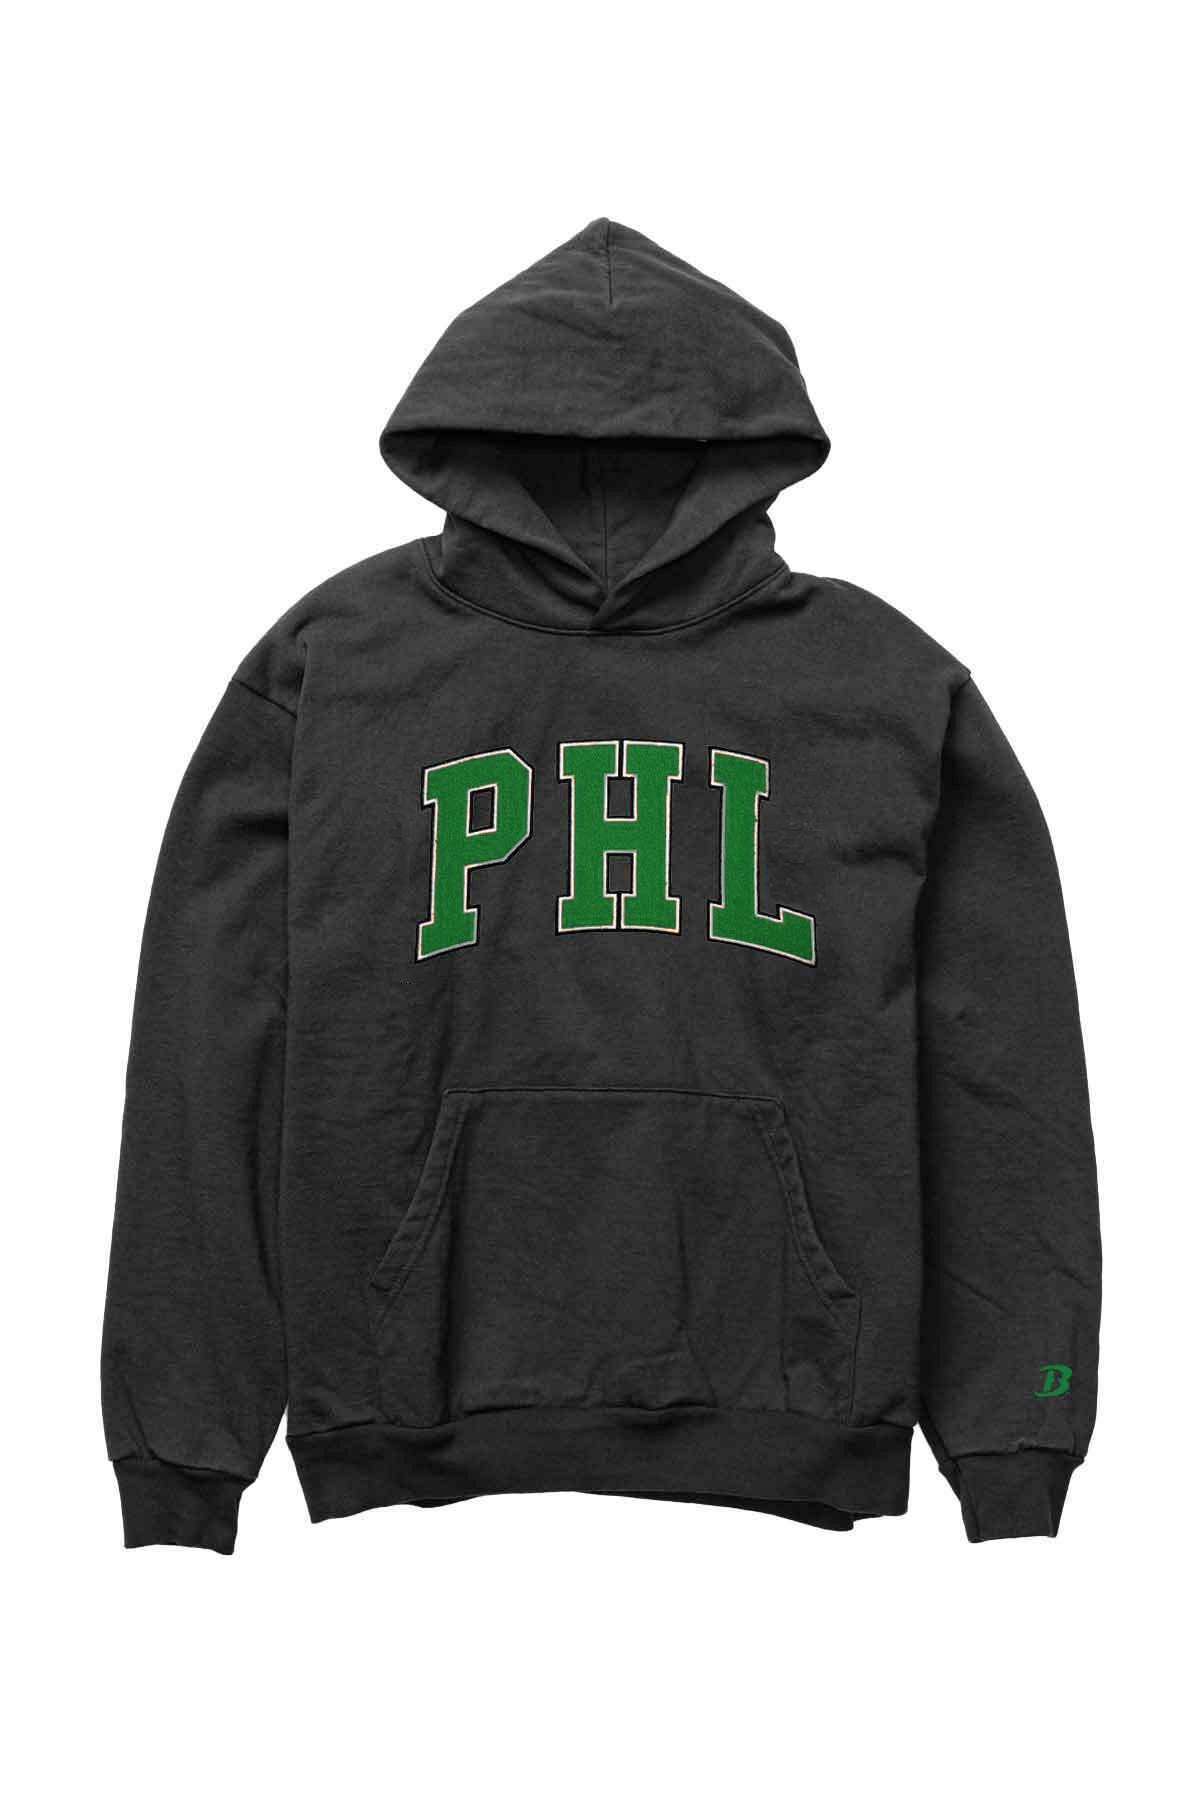 Limited Edition Boathouse Unisex PHL Chenille Hoodie Black / Small